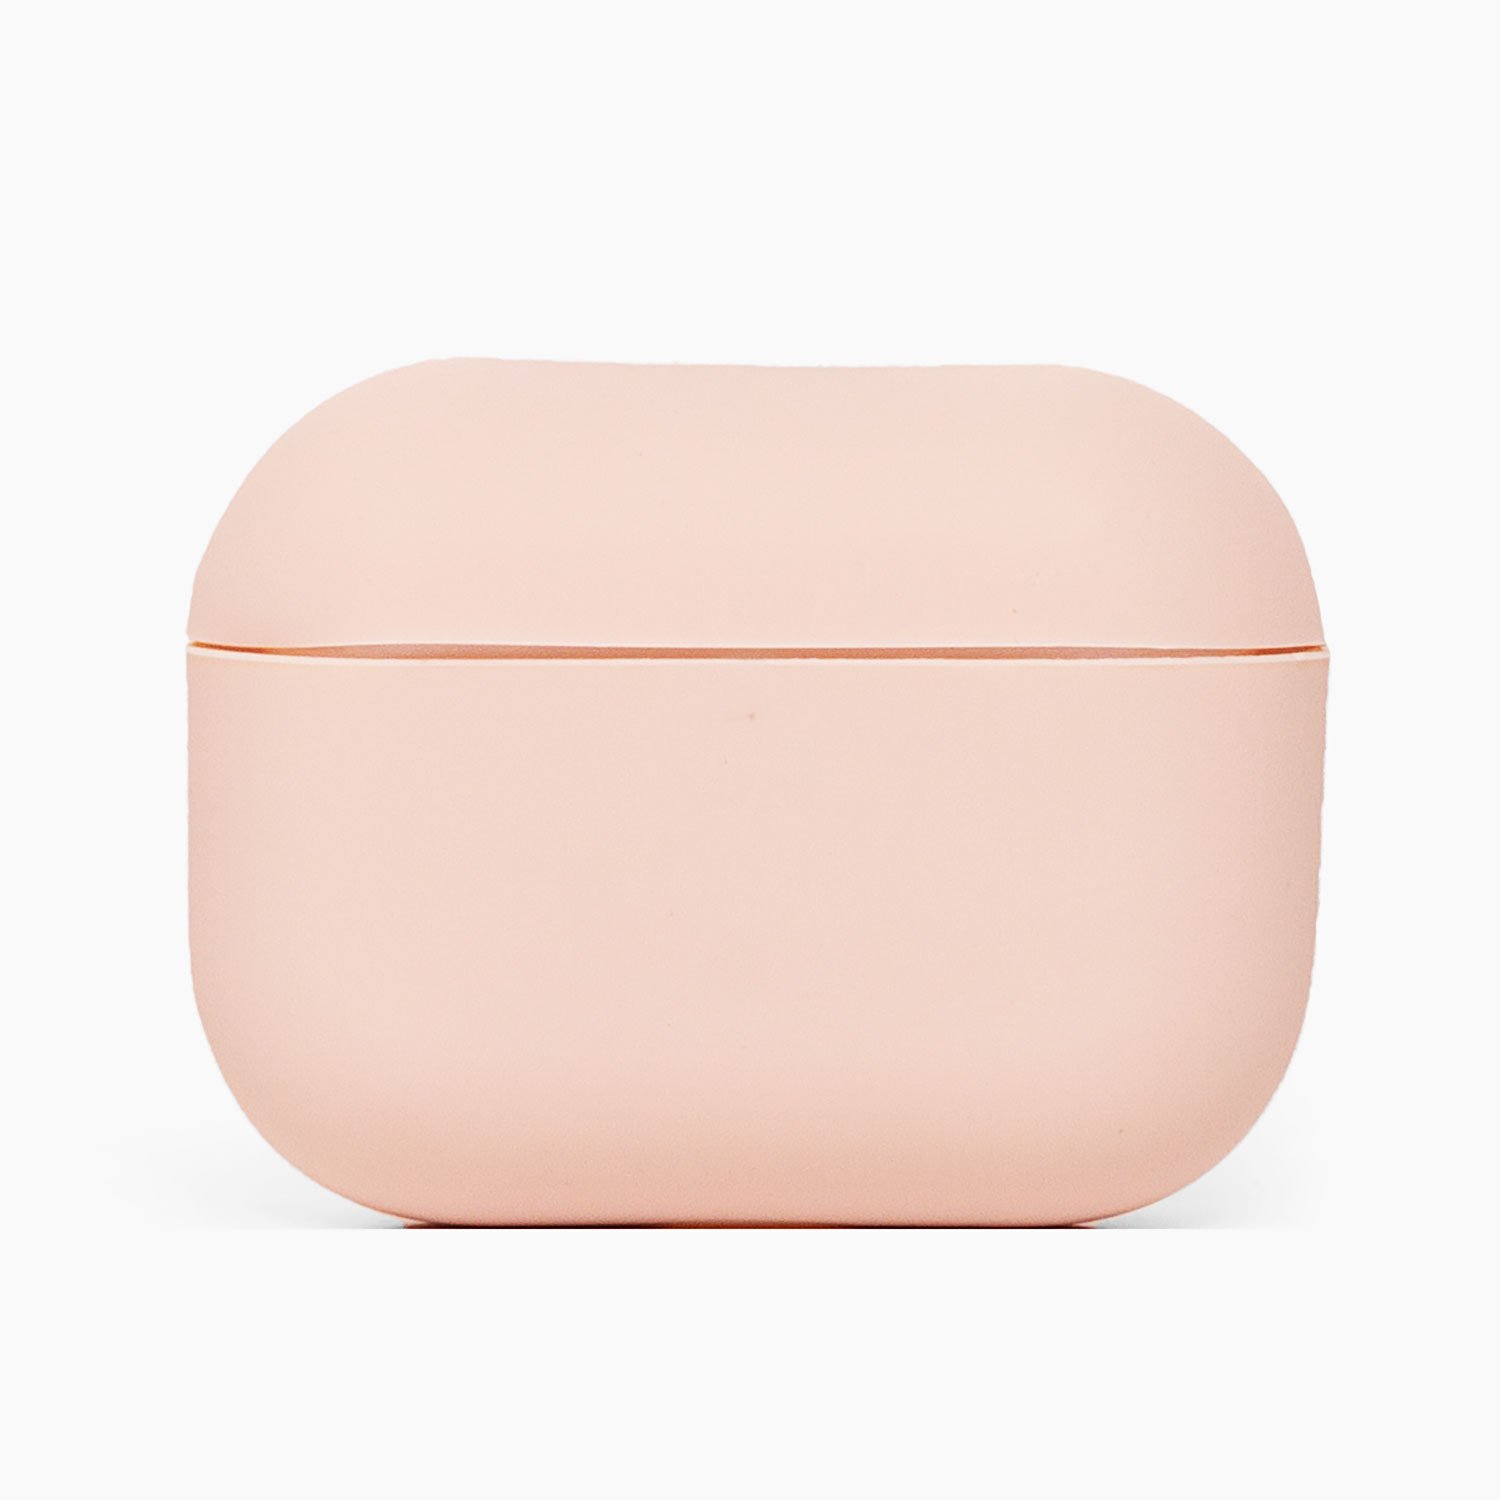 Чехол кейс - Soft touch для Apple AirPods Pro, rose gold pearl (120004)